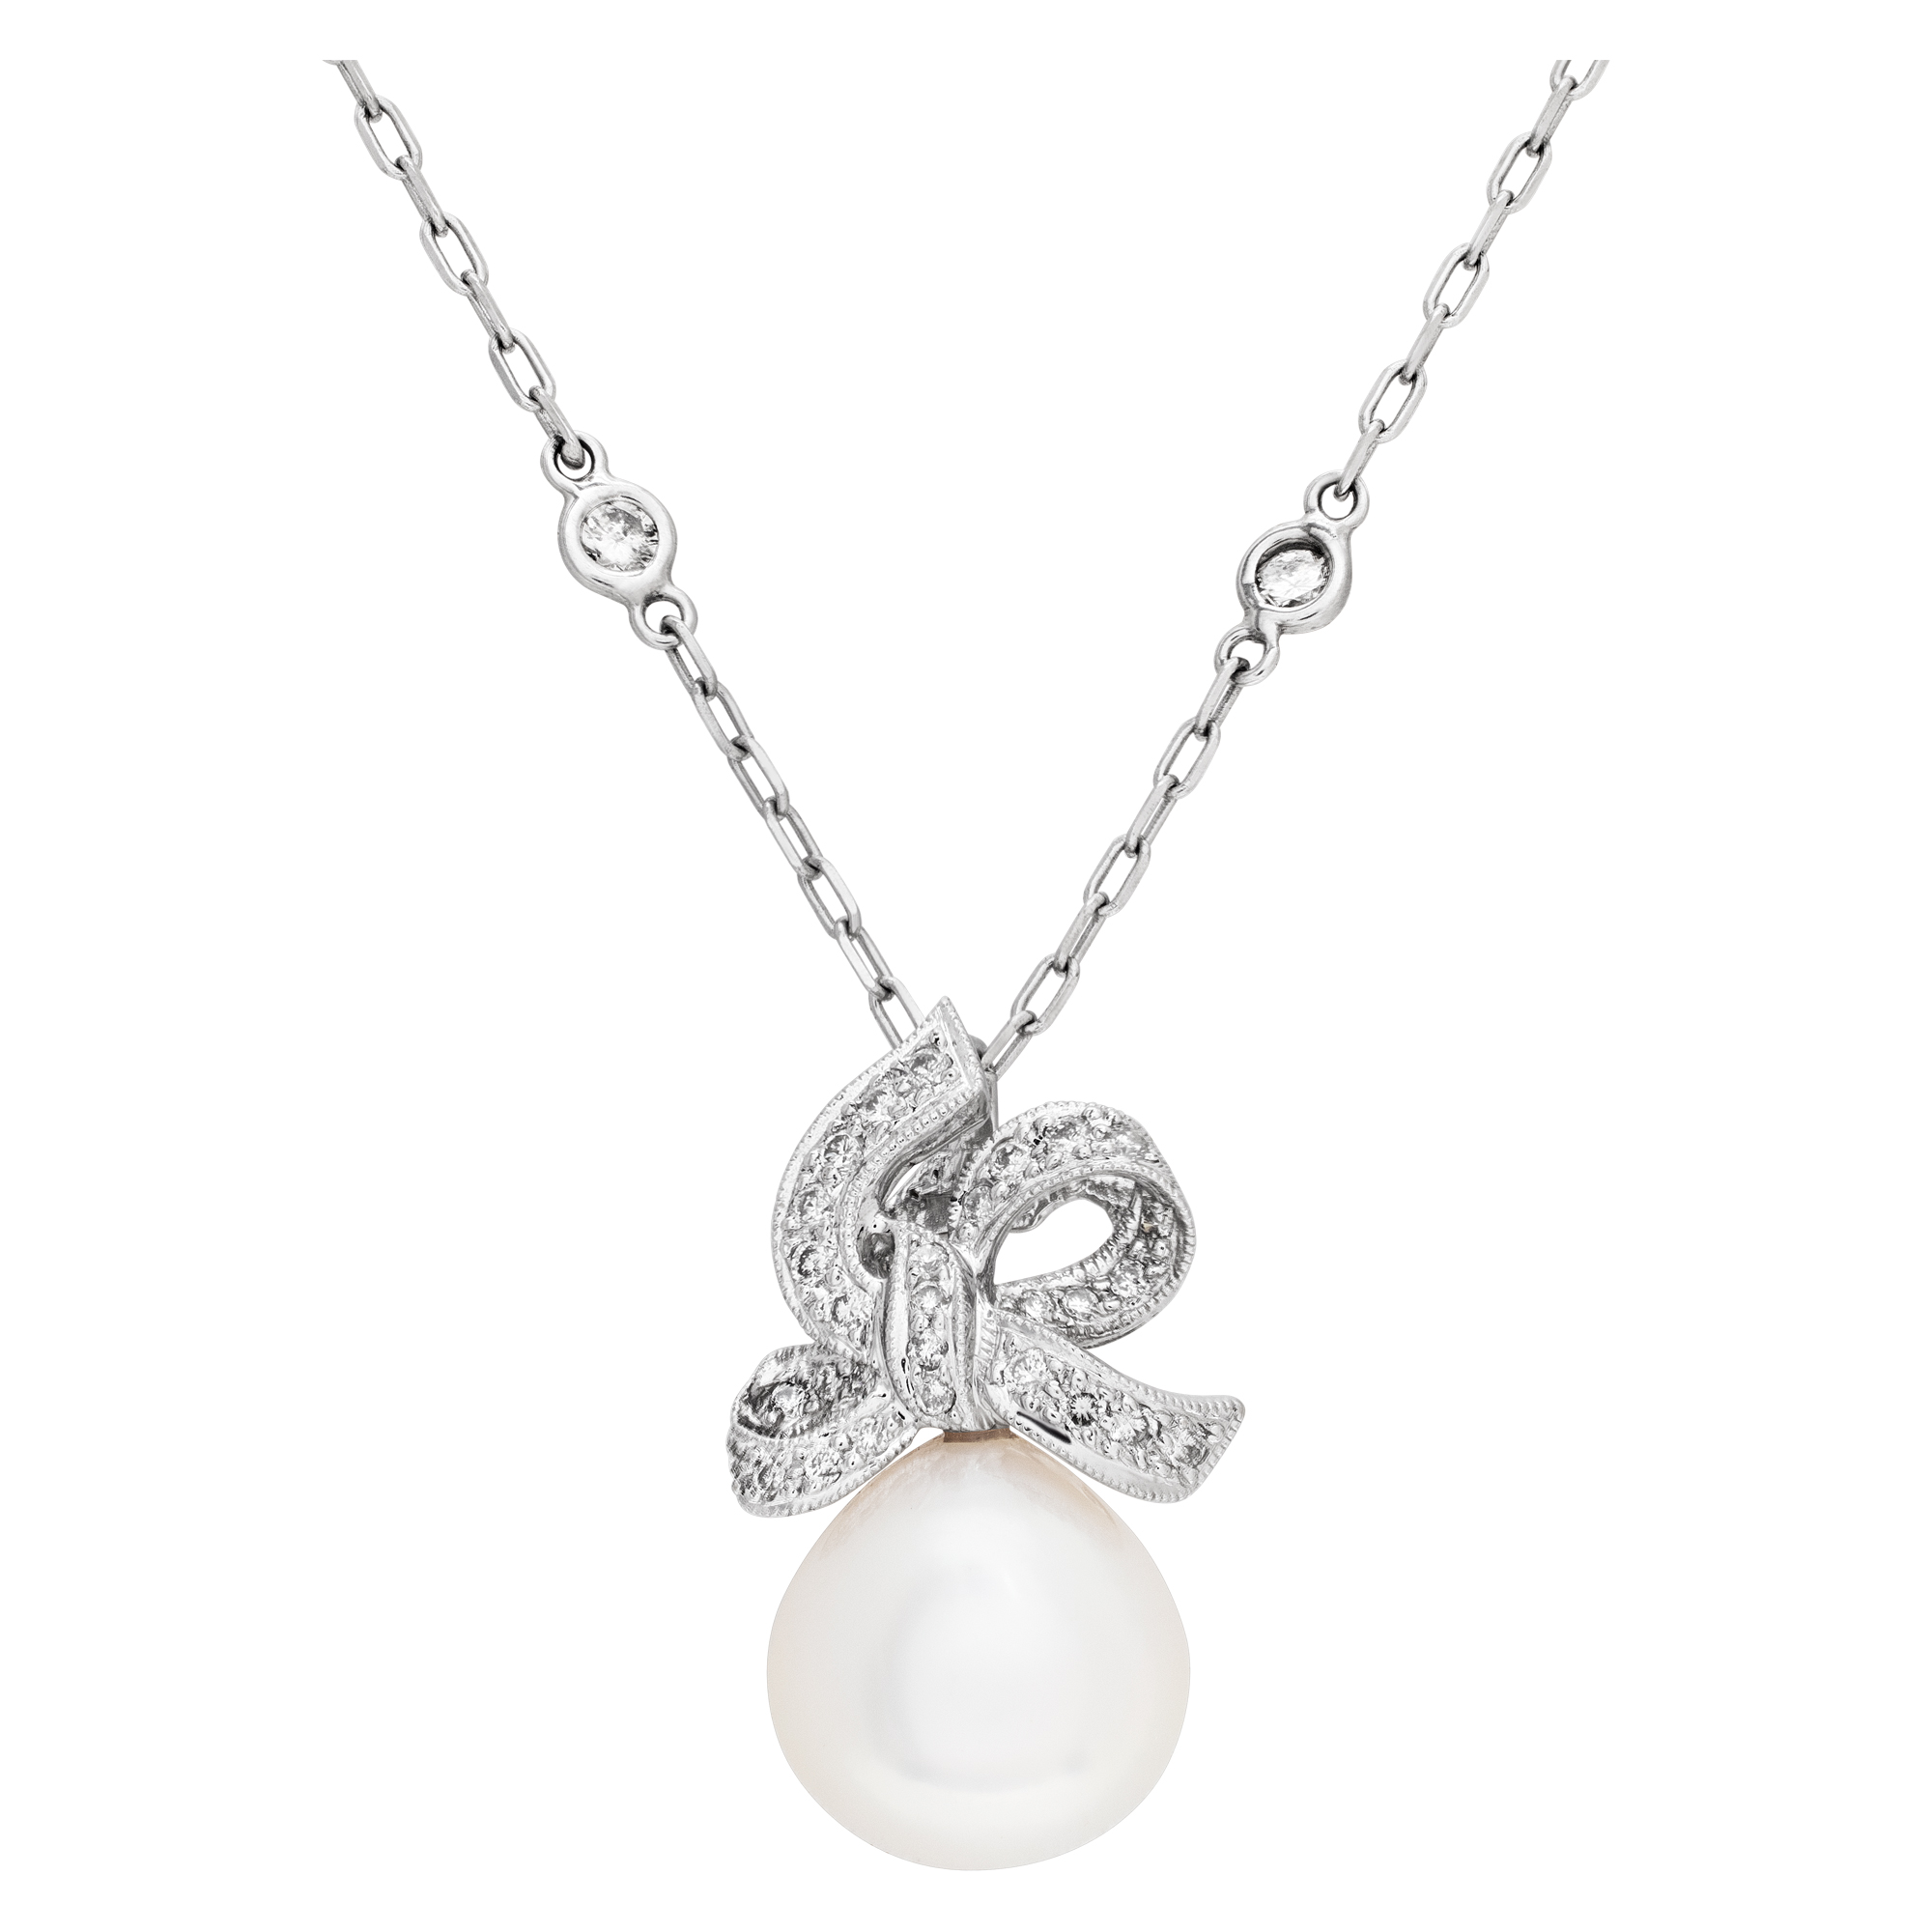 Pearl and diamond pendant in 18k white gold